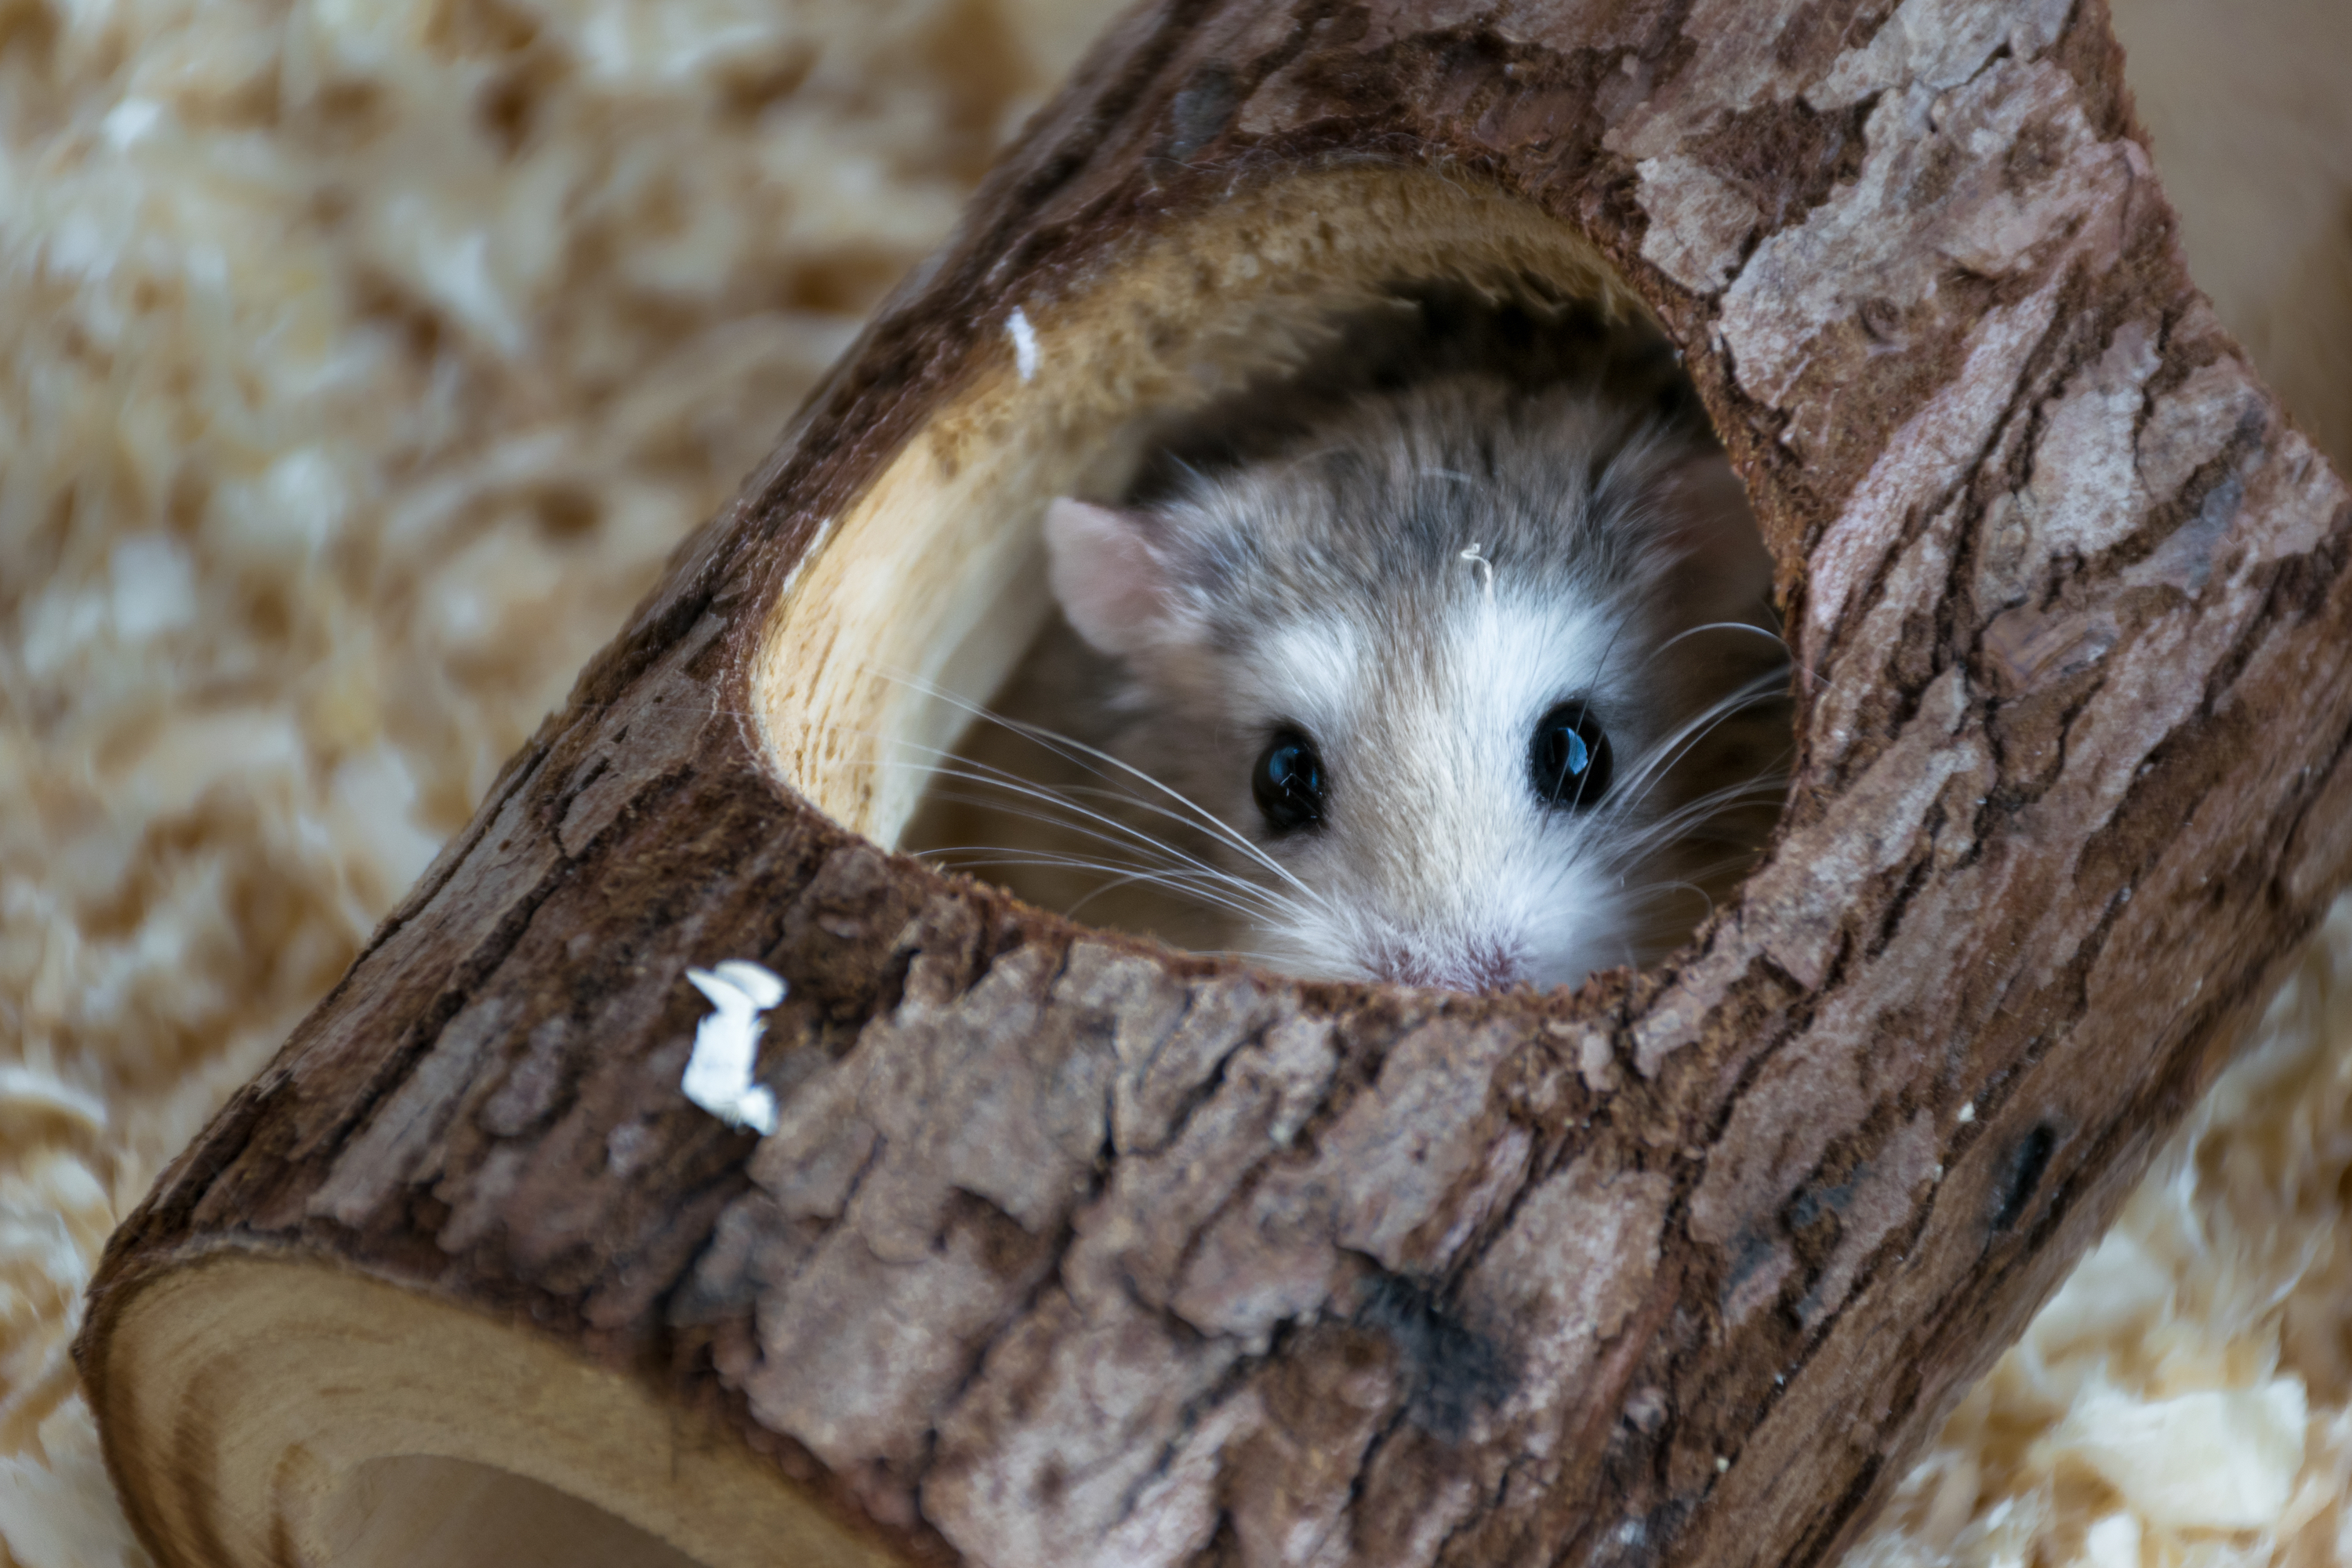 Roborovski hamster hiding in a tree trunk toy and looking out to the camera